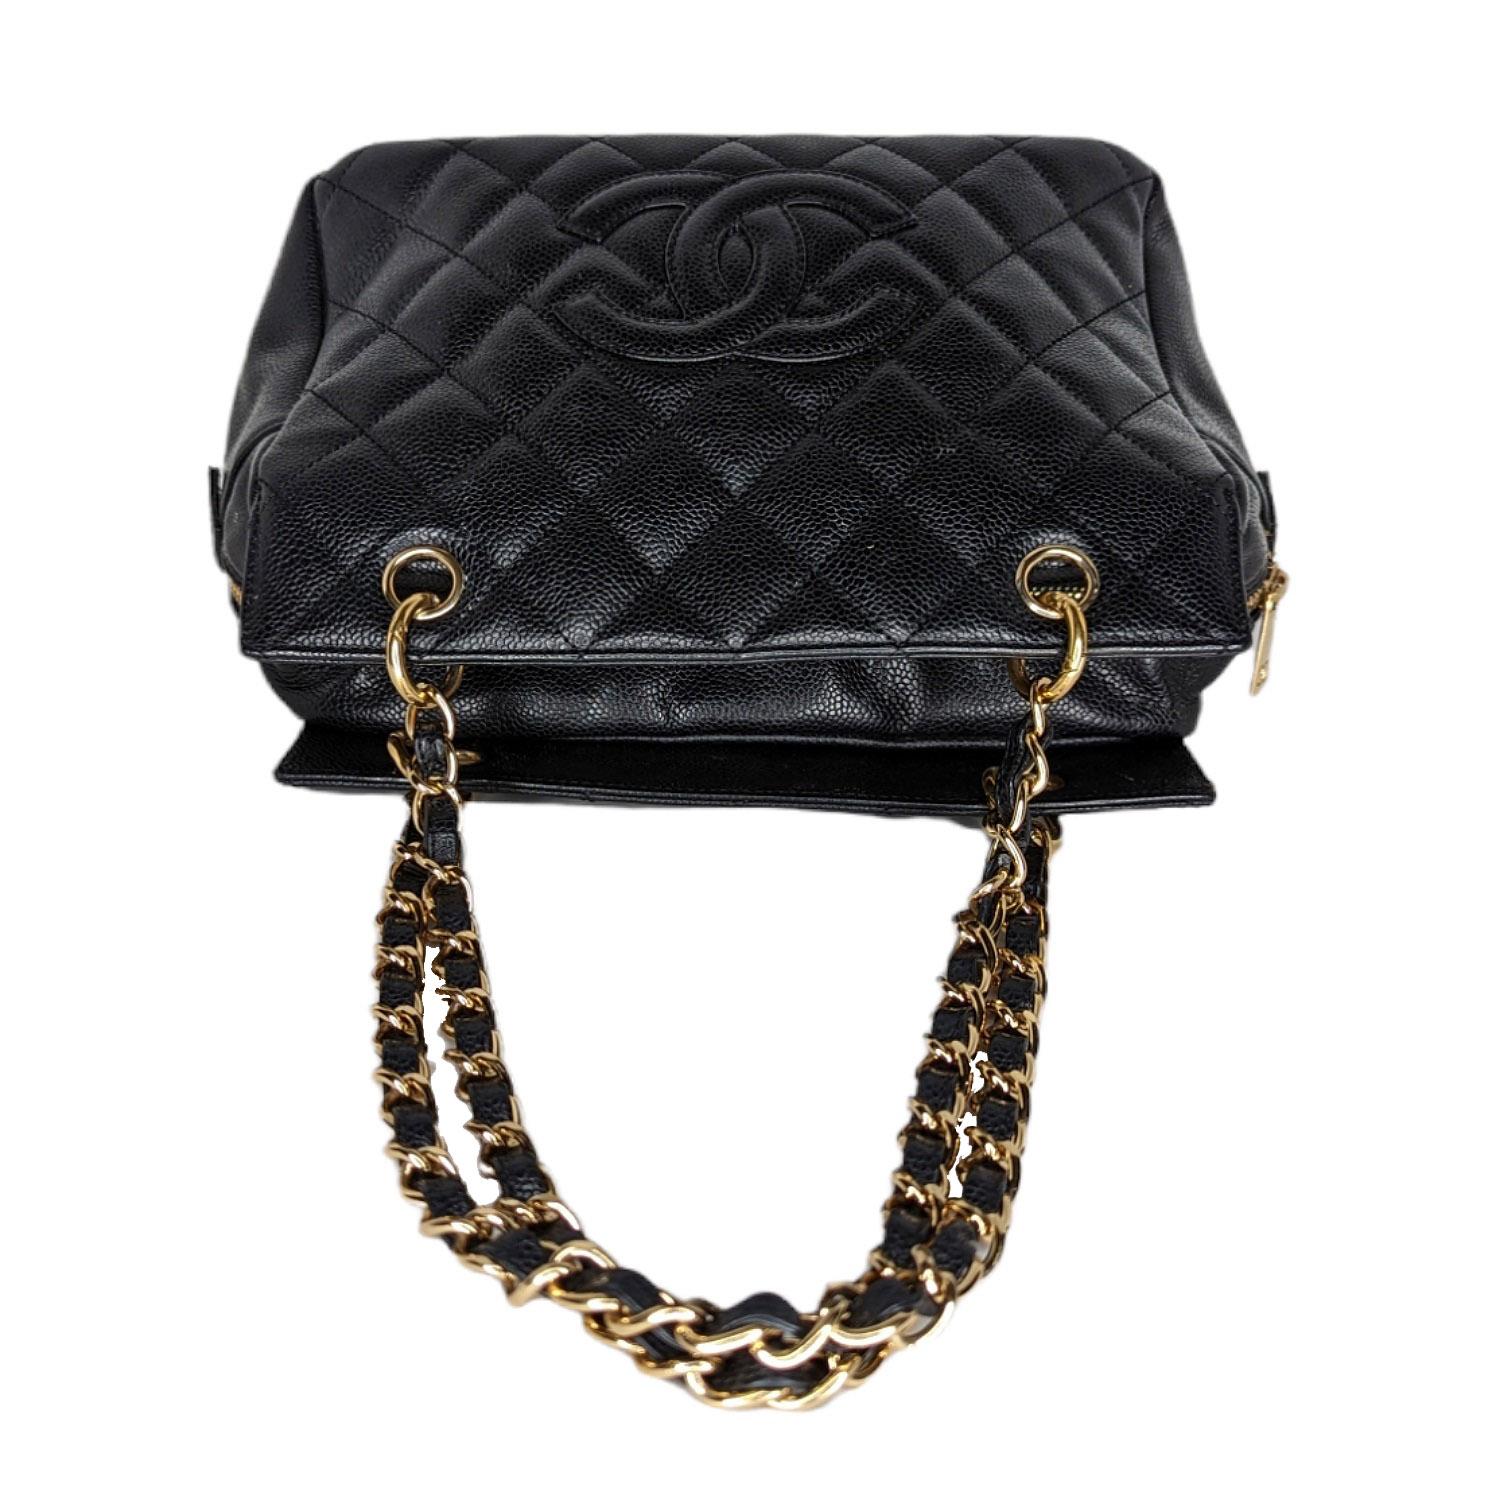 Black Chanel Vintage Quilted Caviar Petite Timeless Tote